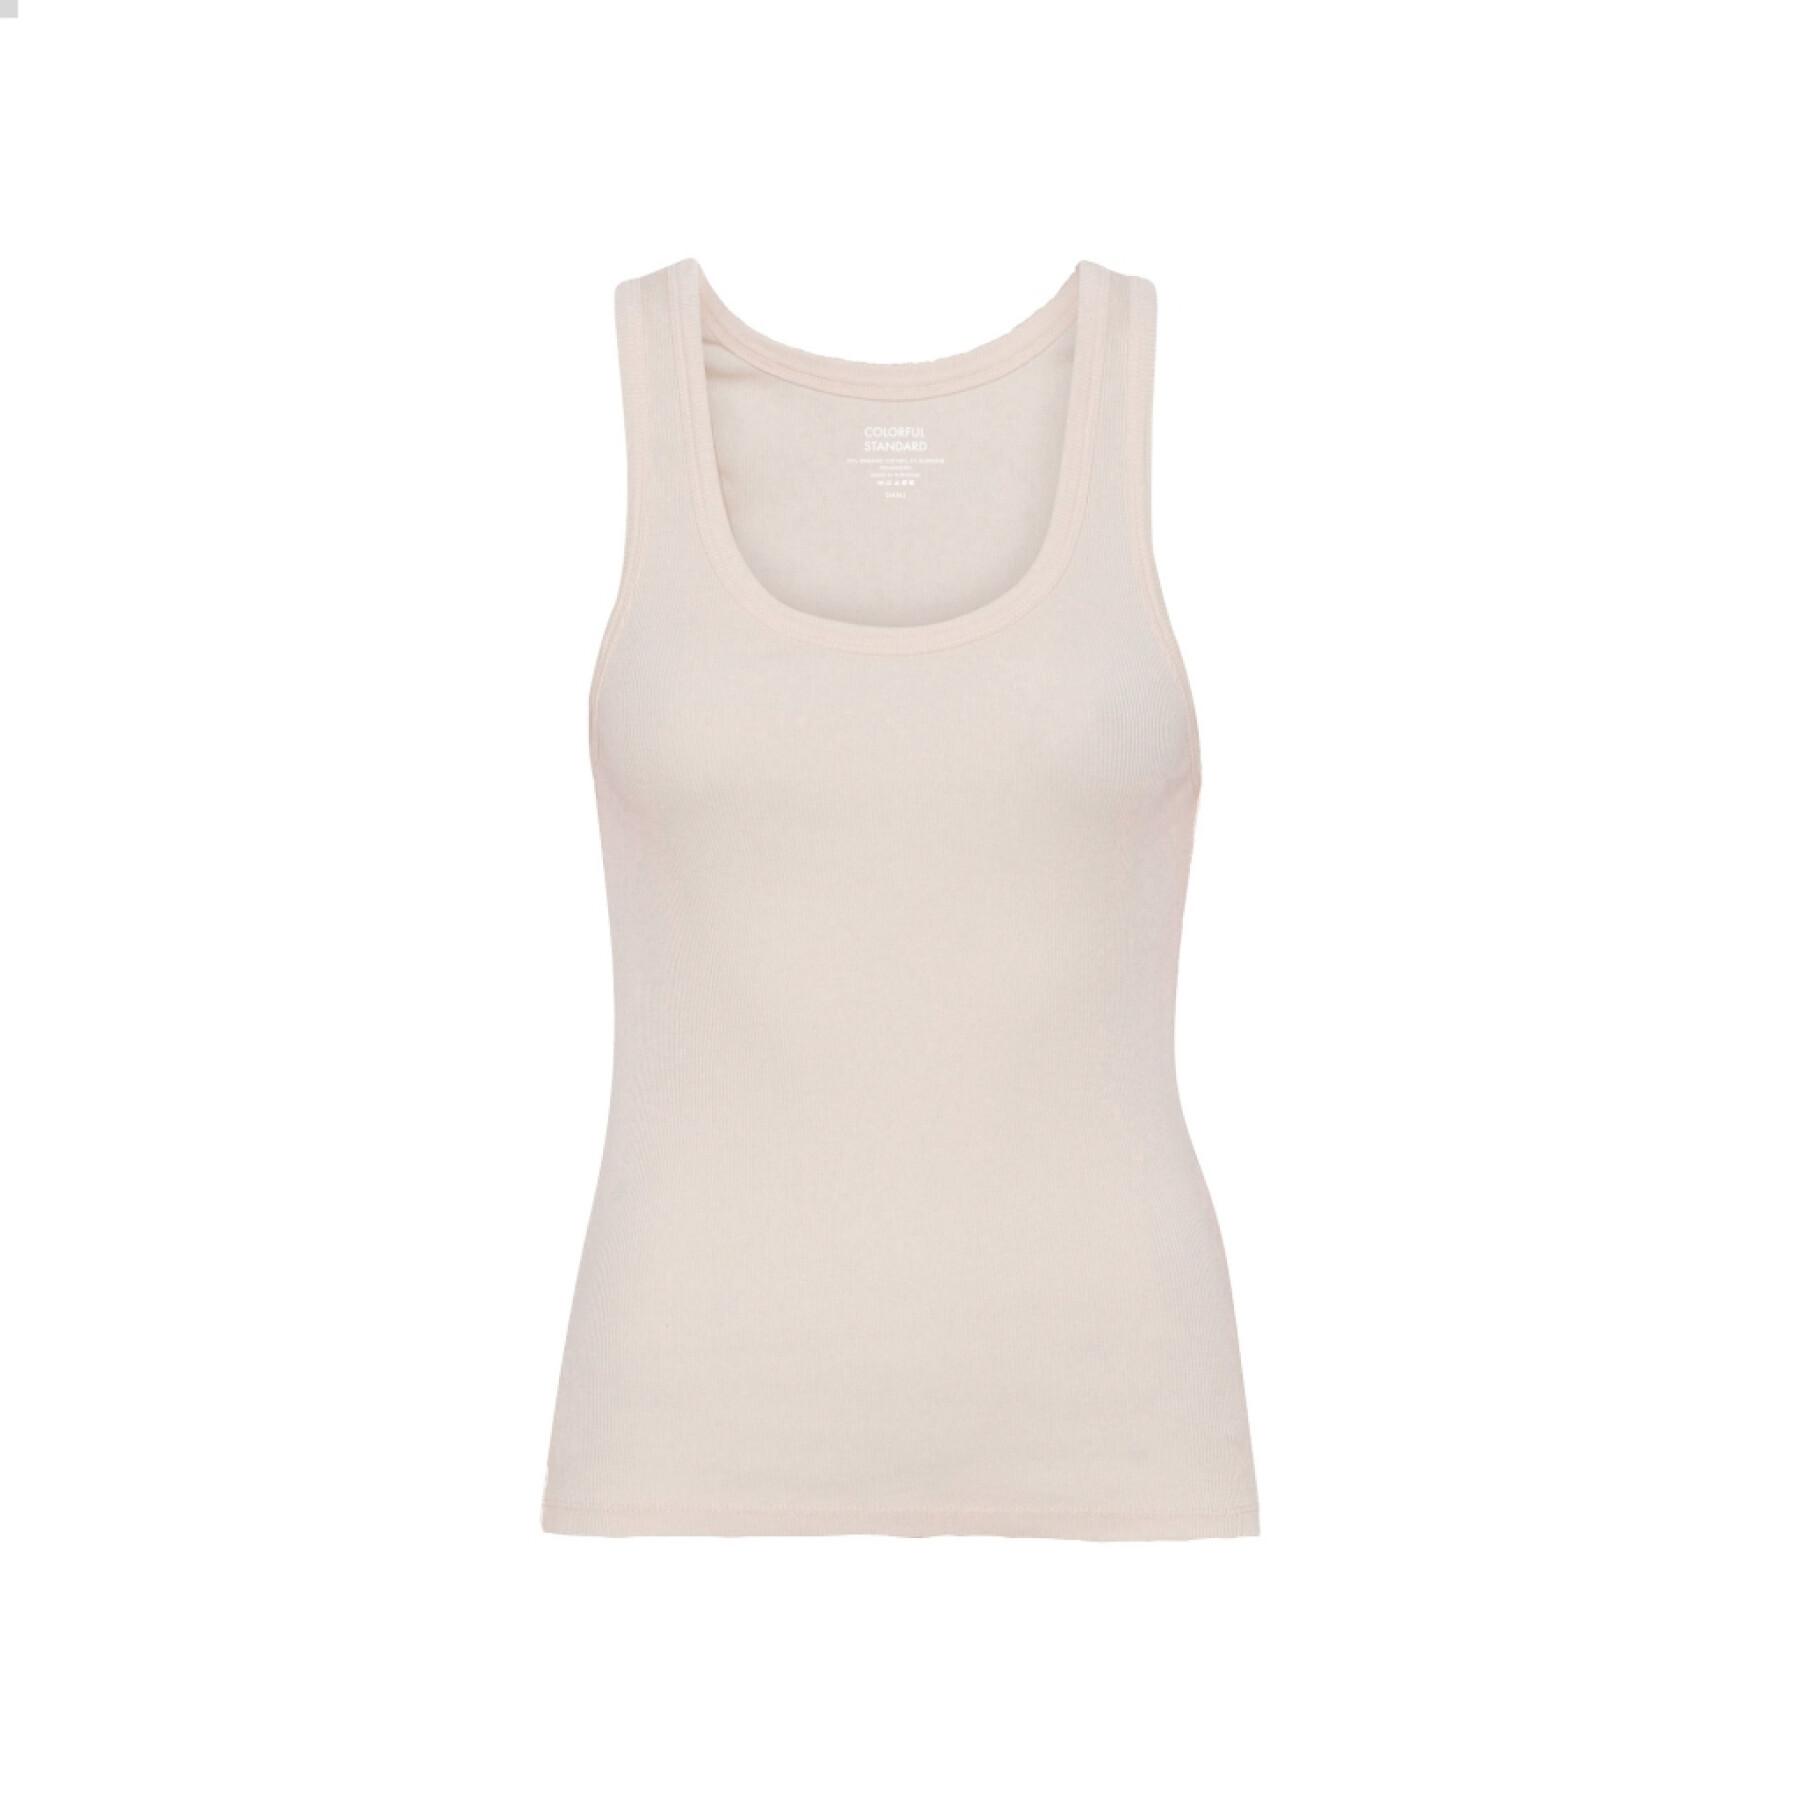 Women's ribbed tank top Colorful Standard Organic ivory white